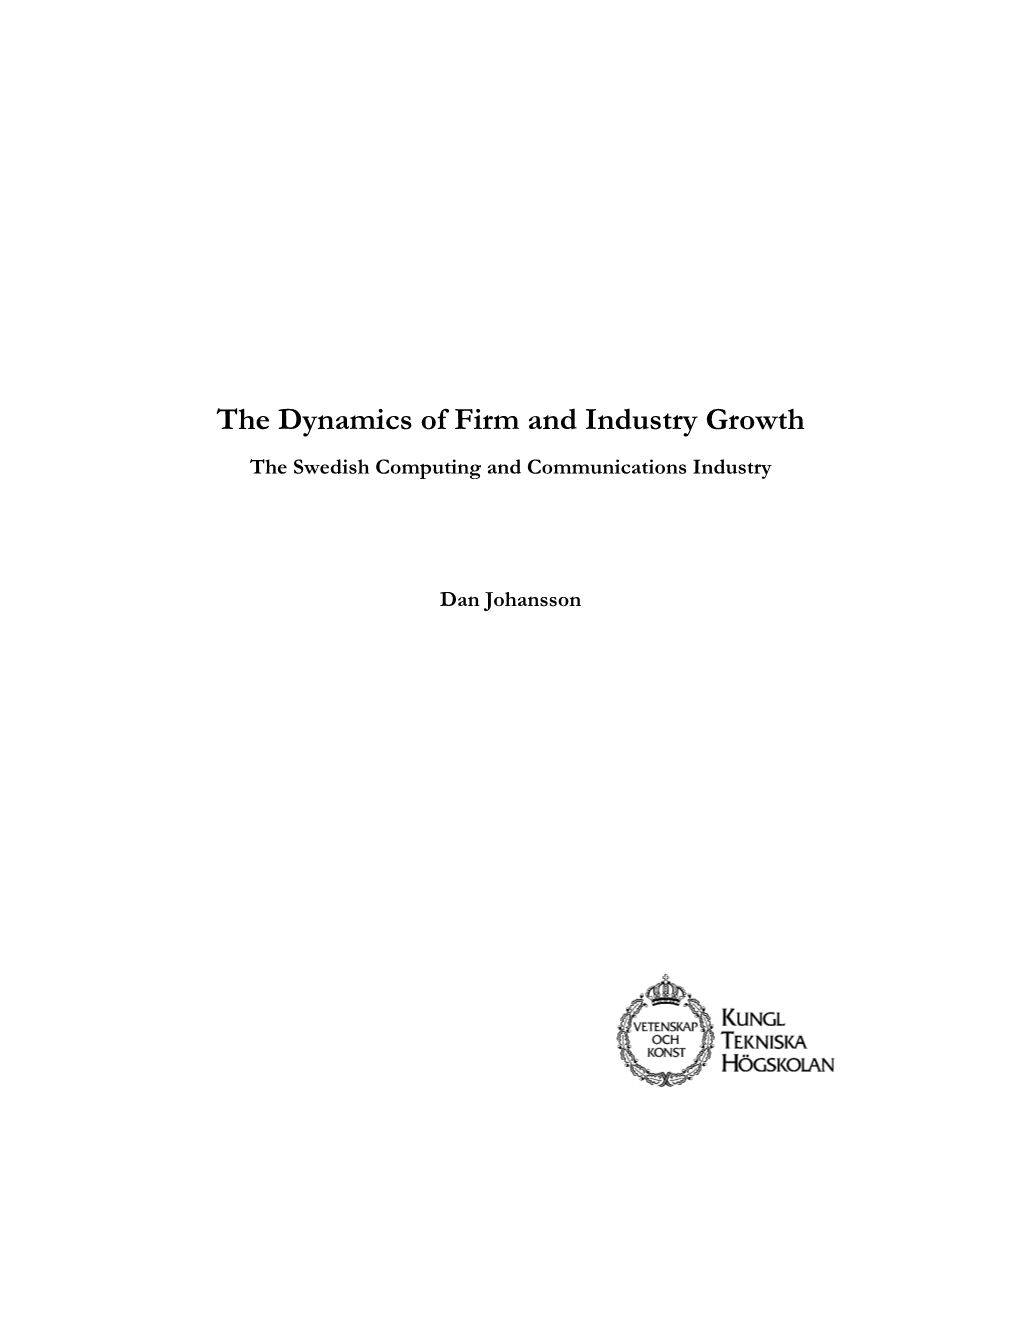 The Dynamics of Firm and Industry Growth the Swedish Computing and Communications Industry